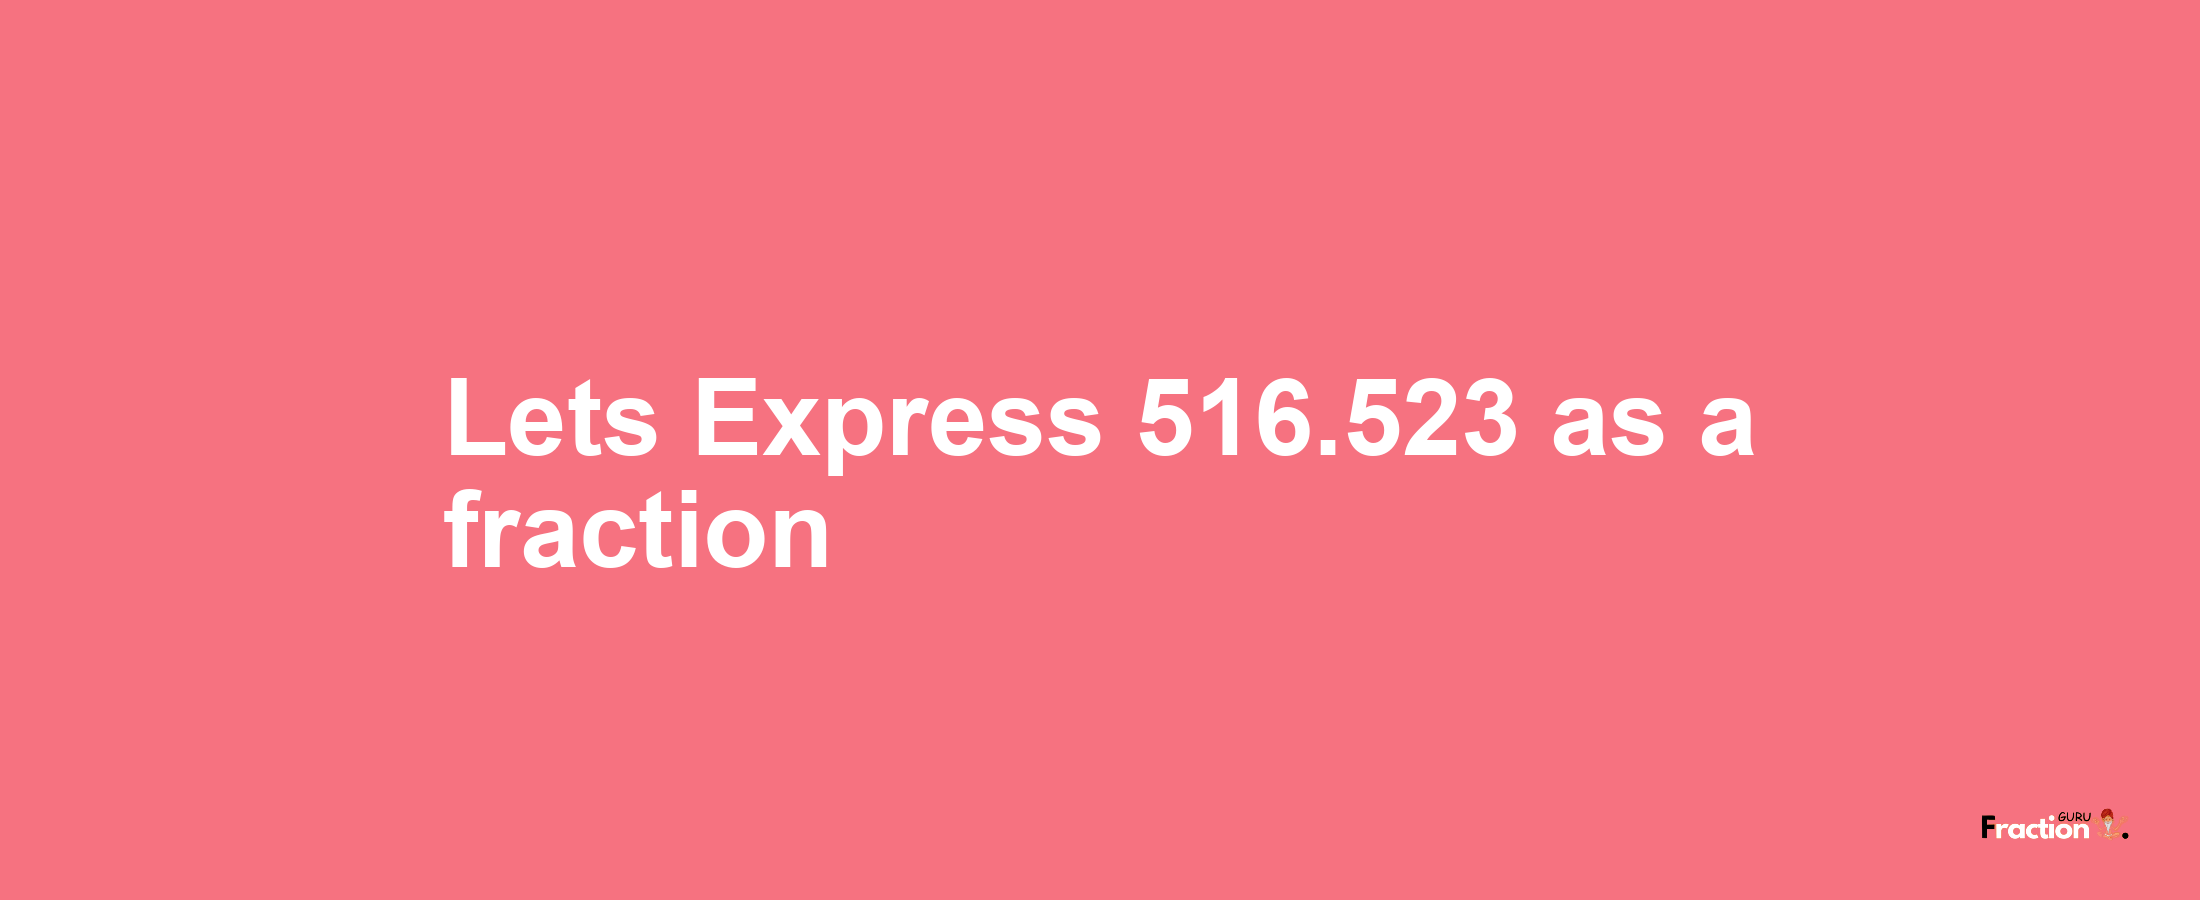 Lets Express 516.523 as afraction